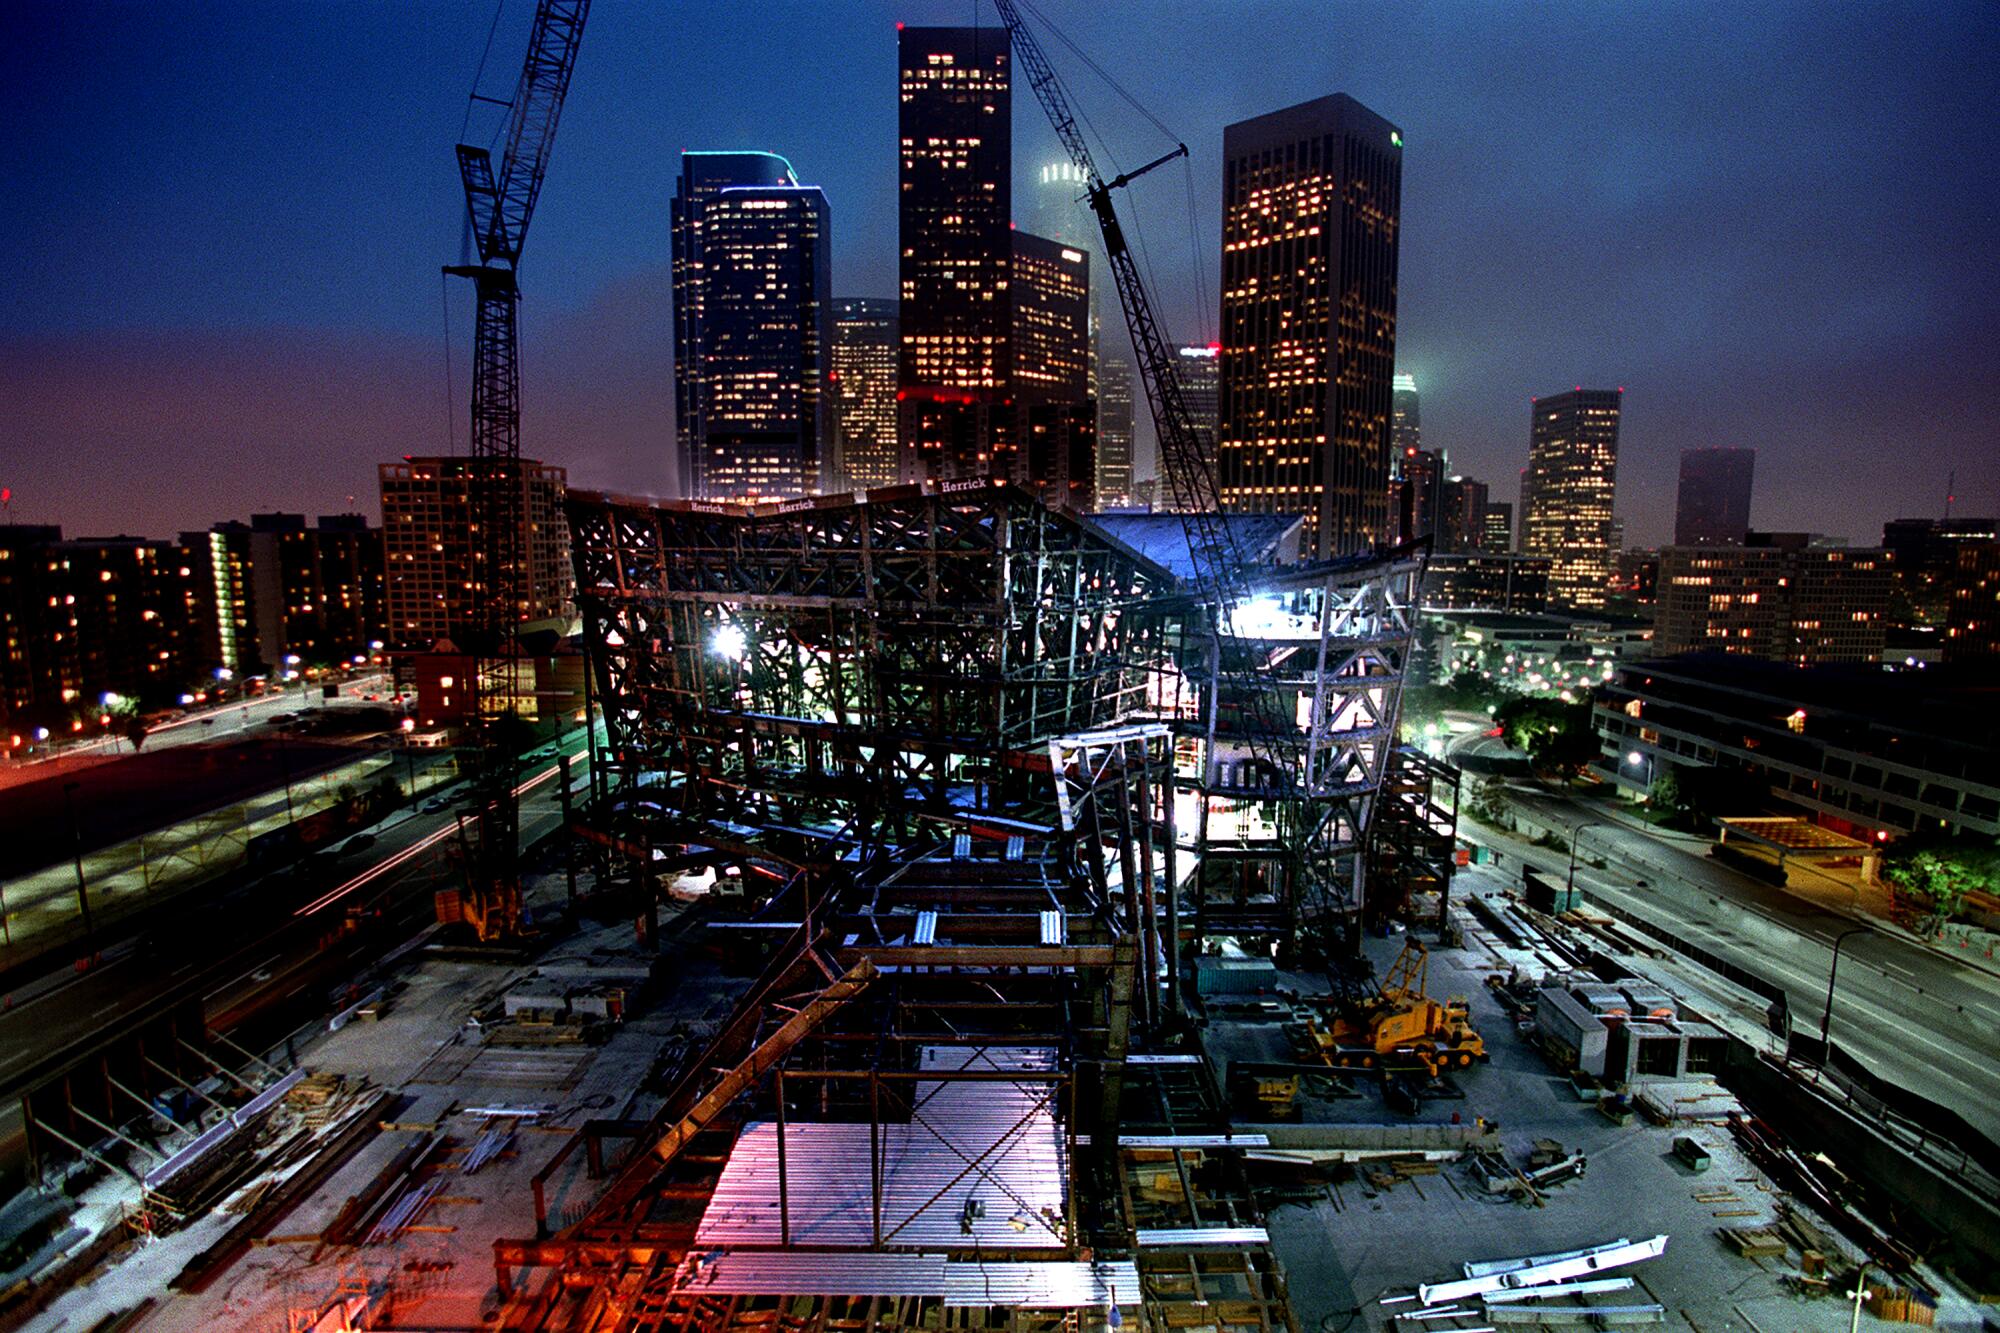 A night view of Disney Hall under construction in 2001.